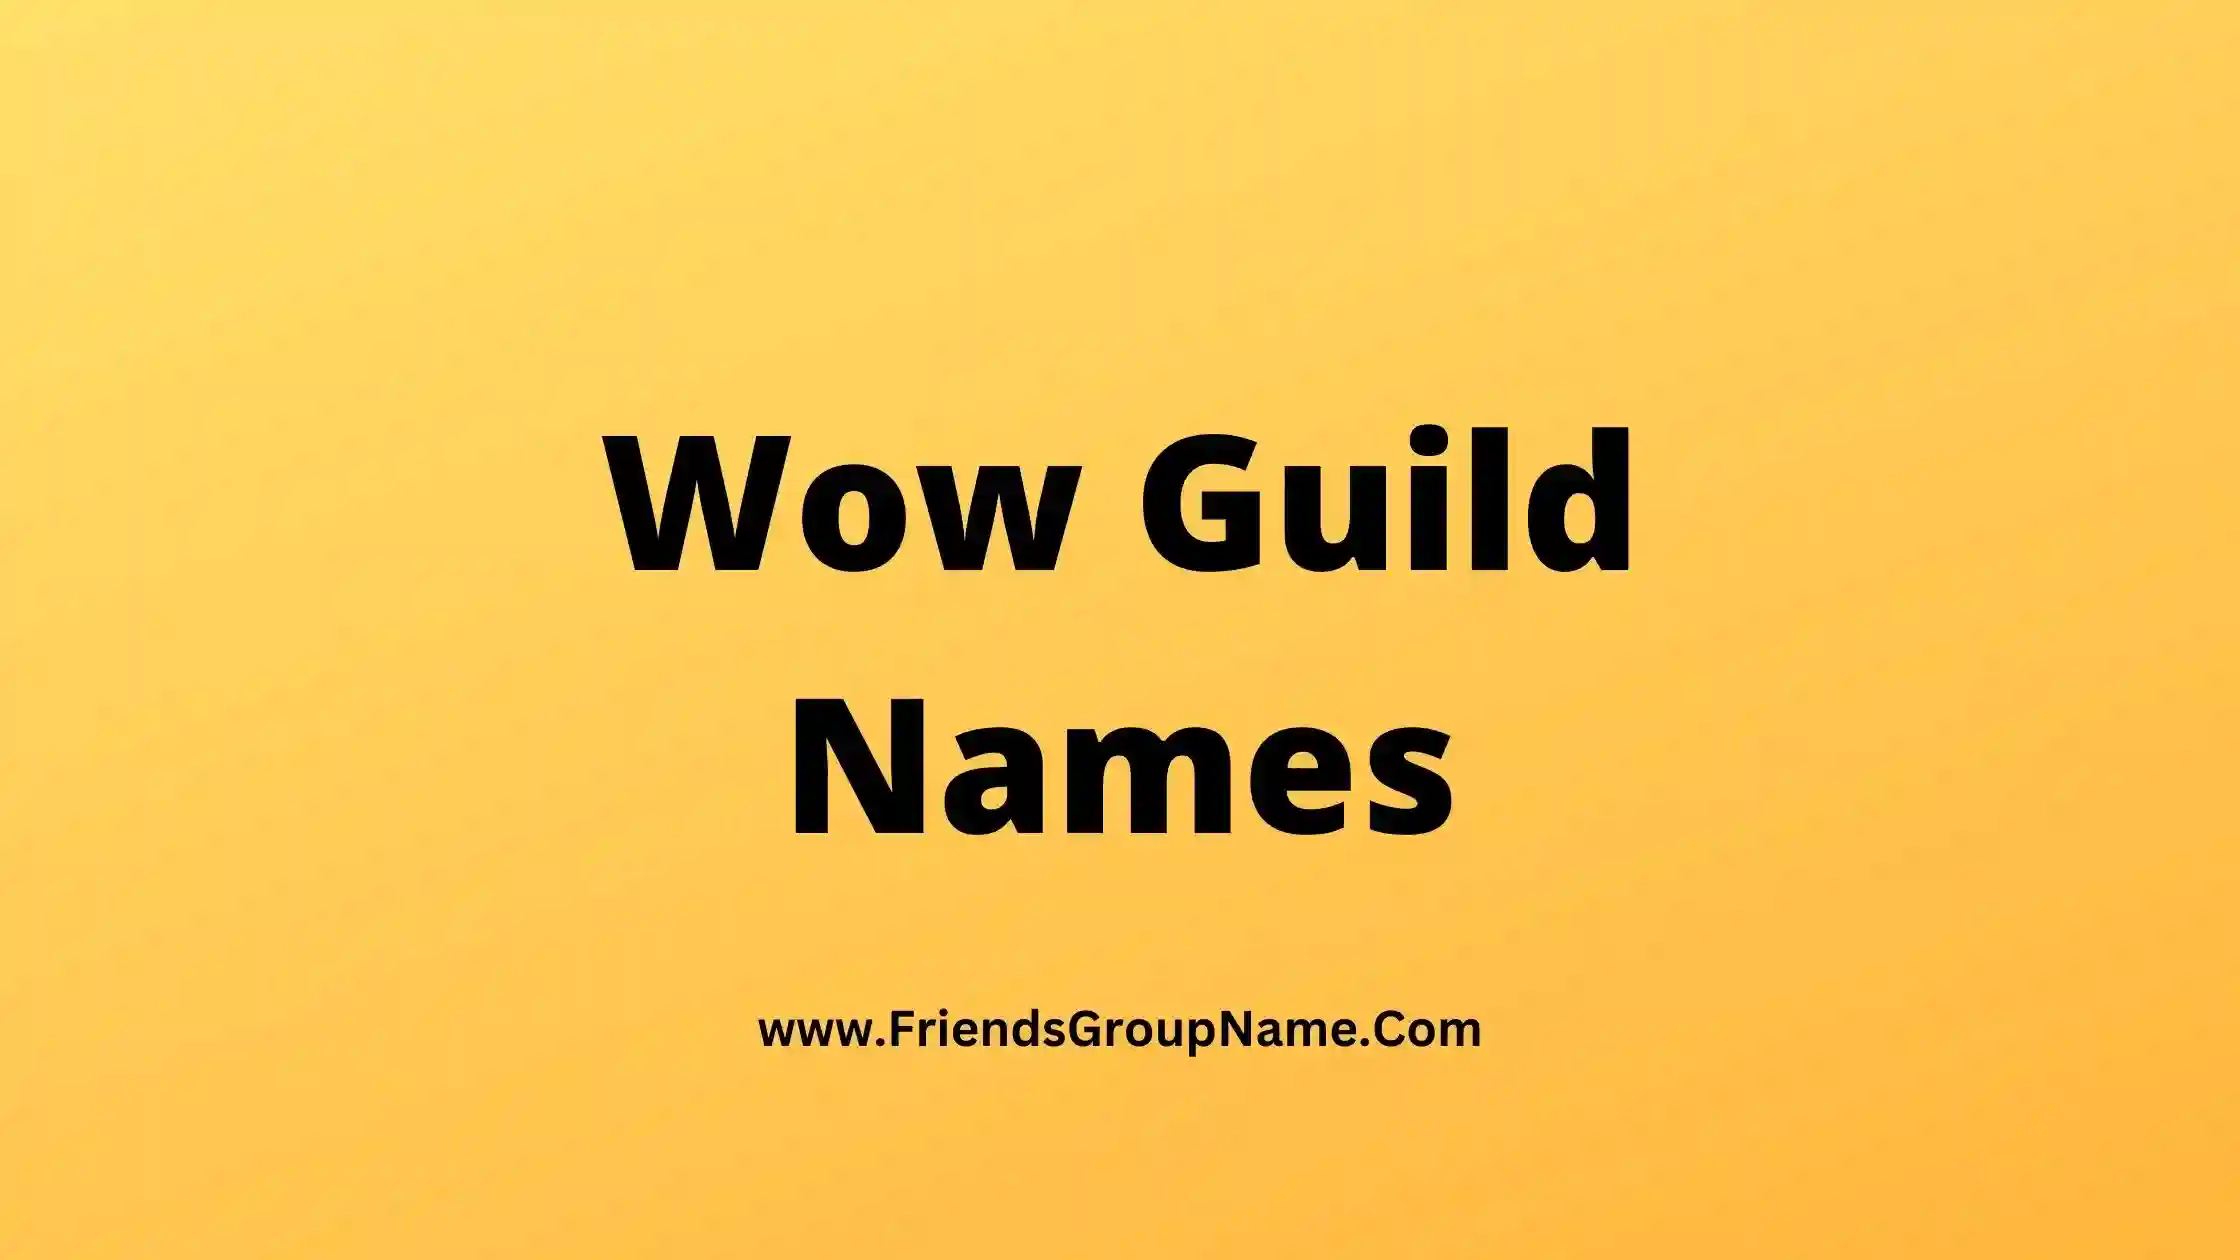 Wow Guild Names